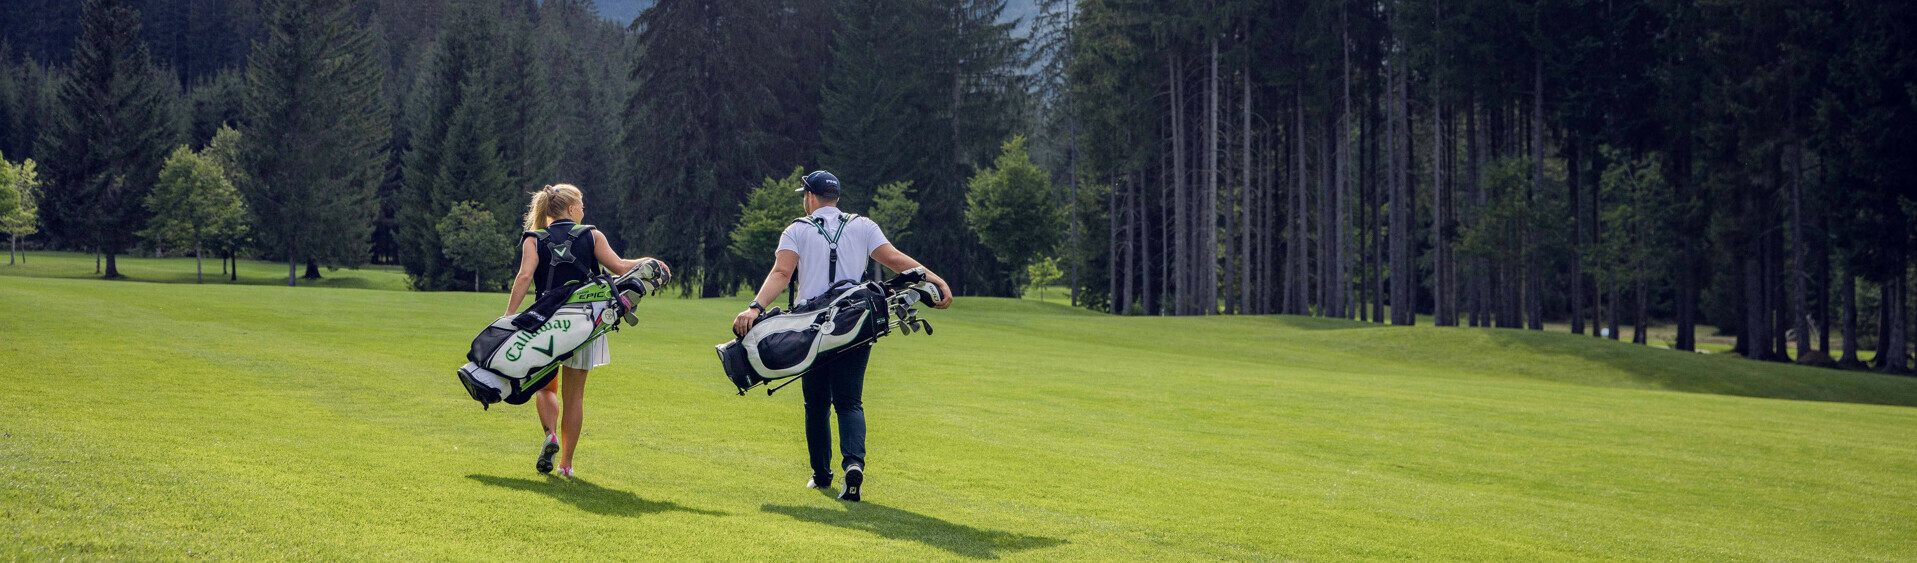 Spectacular scenery and perfect greens provide the backdrop for golfing on the Golf- und Landclub Achensee in Pertisau.